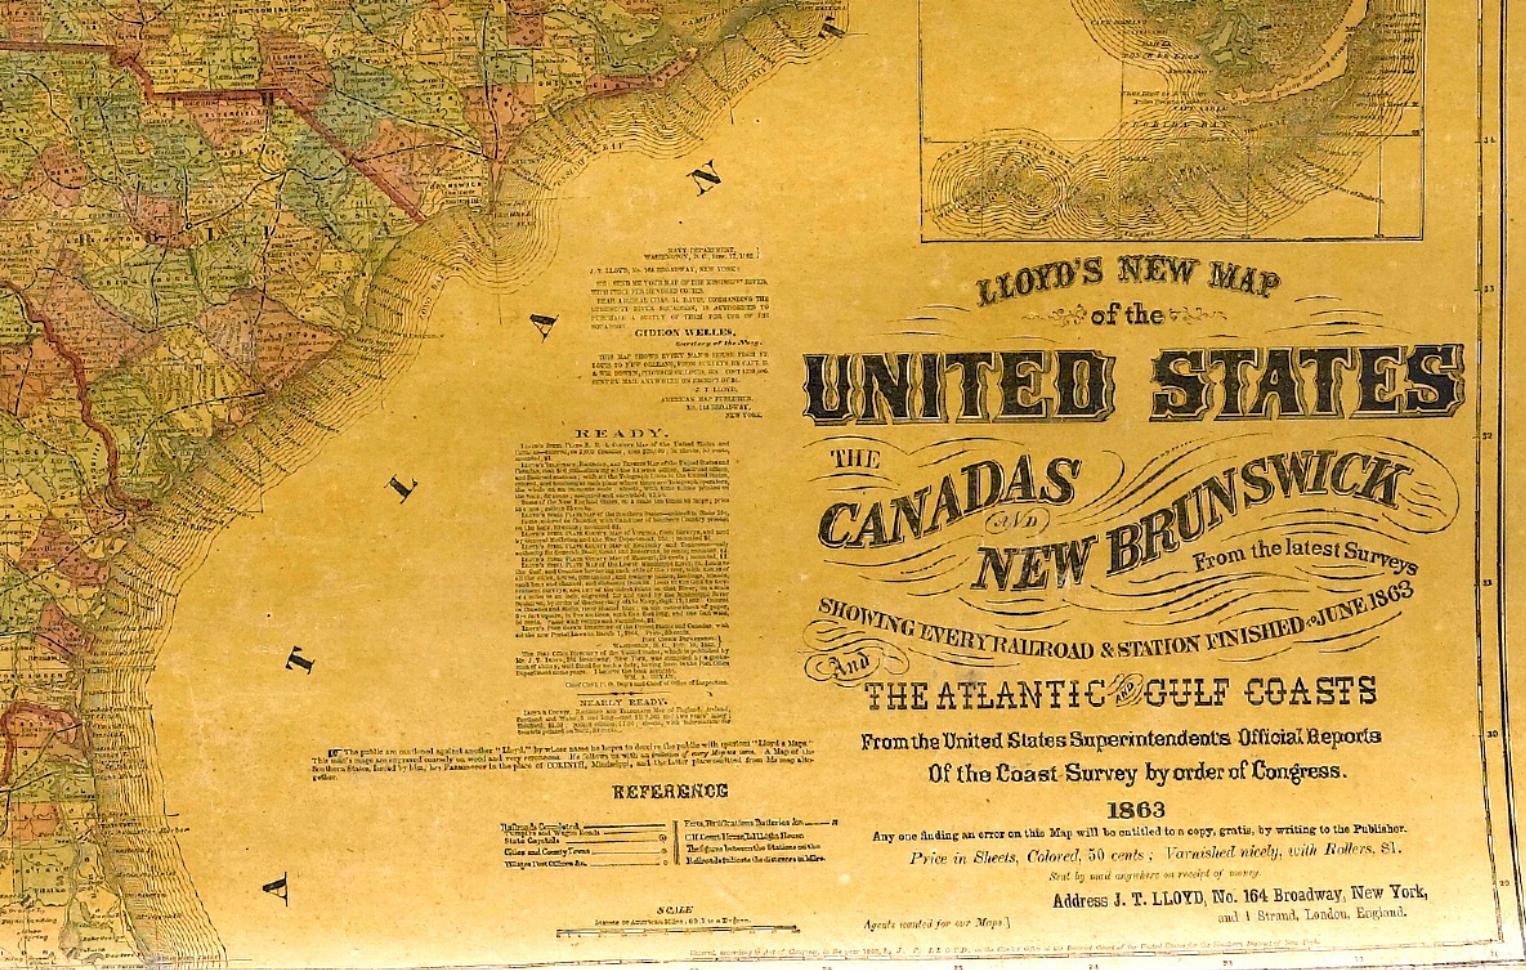 Presented is “Lloyd's New Map of the United States, the Canadas and New Brunswick, From the latest Surveys, Showing Every Railroad & Station Finished to June 1863, and the Atlantic and Gulf Coasts.” A large, Civil War-era hanging map of the United